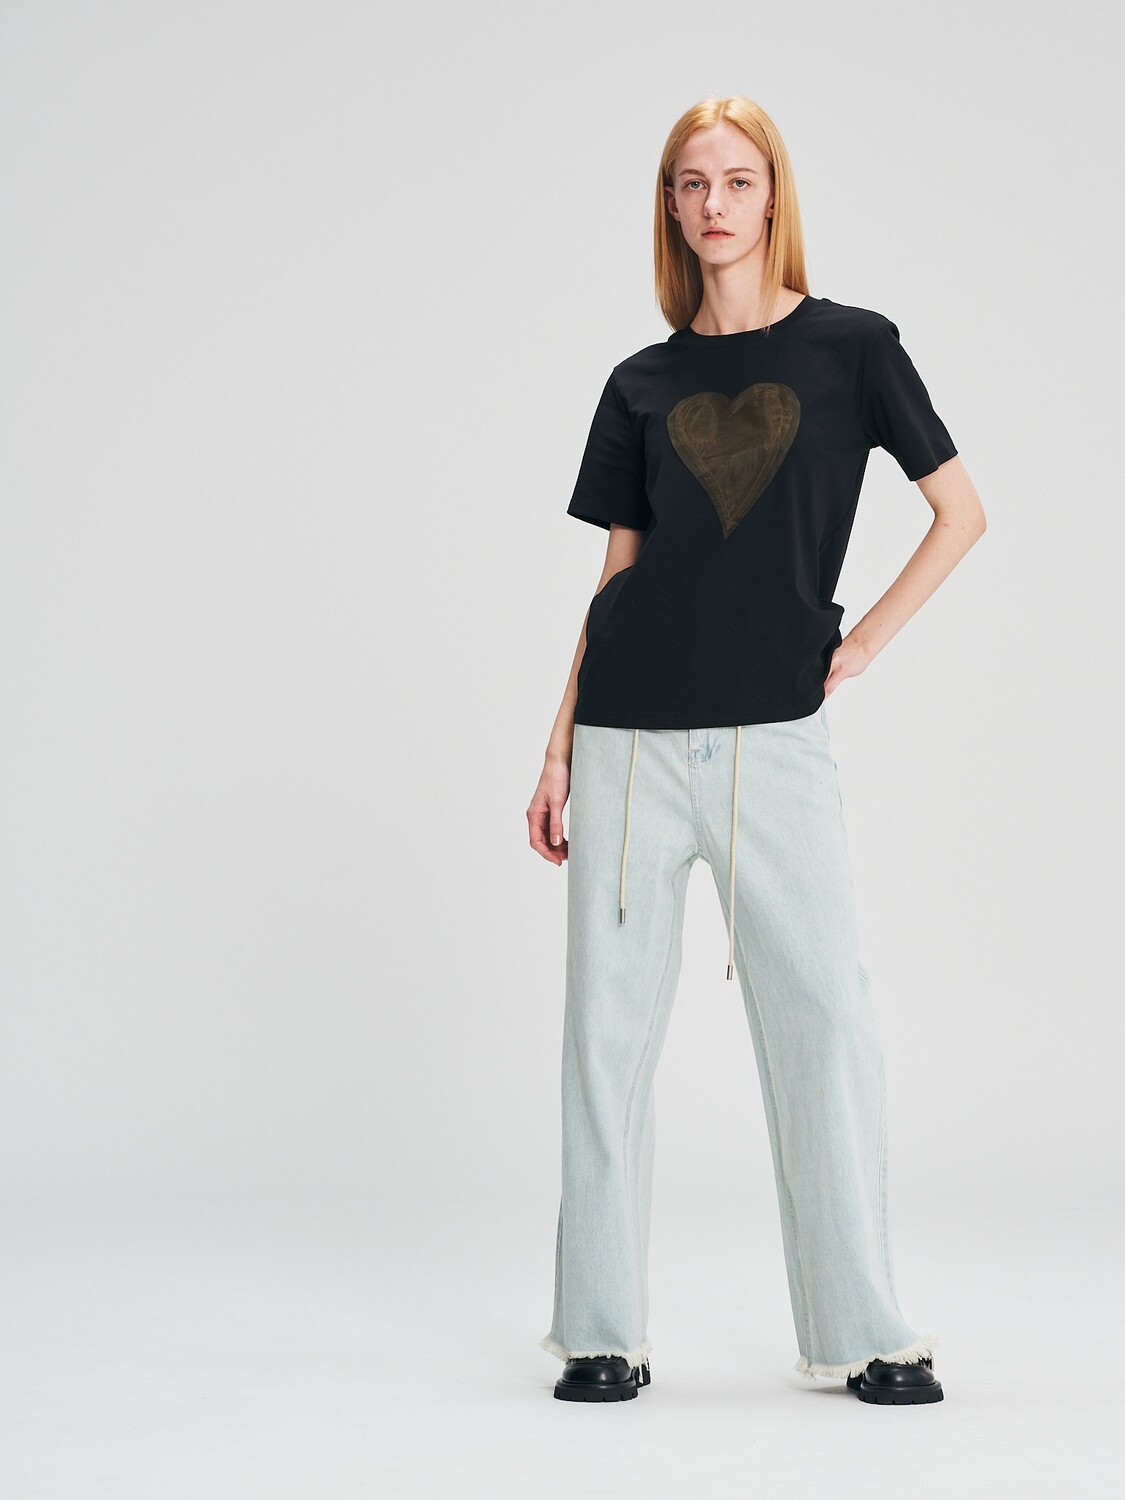 25882 Tulle Heart T-Shirt, Color: White, Size: One-Size